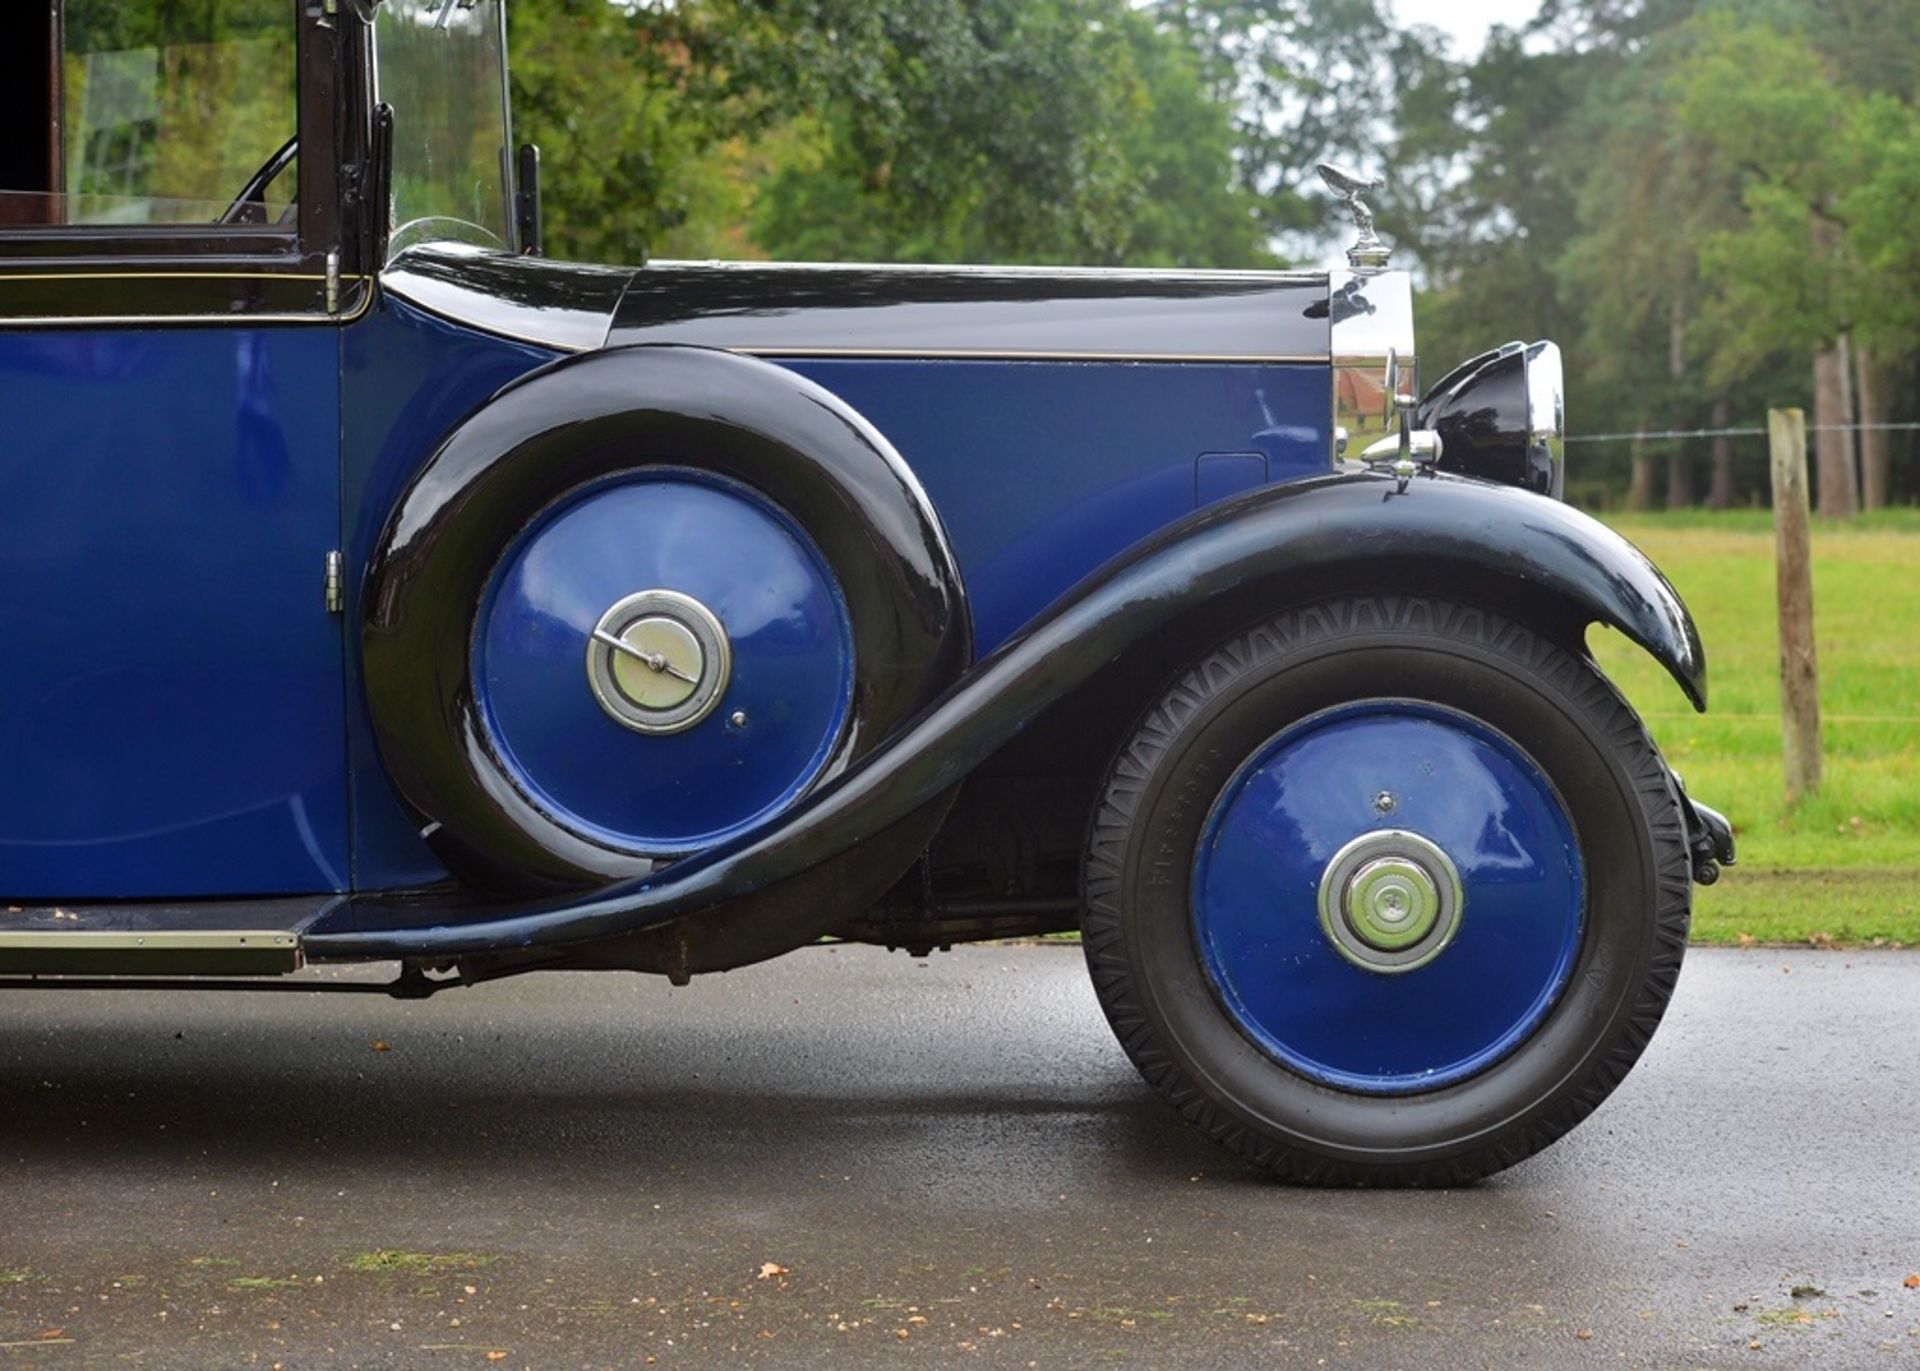 1932 Rolls-Royce 20/25 Limousine by Crosbie & Dunn - Image 11 of 16